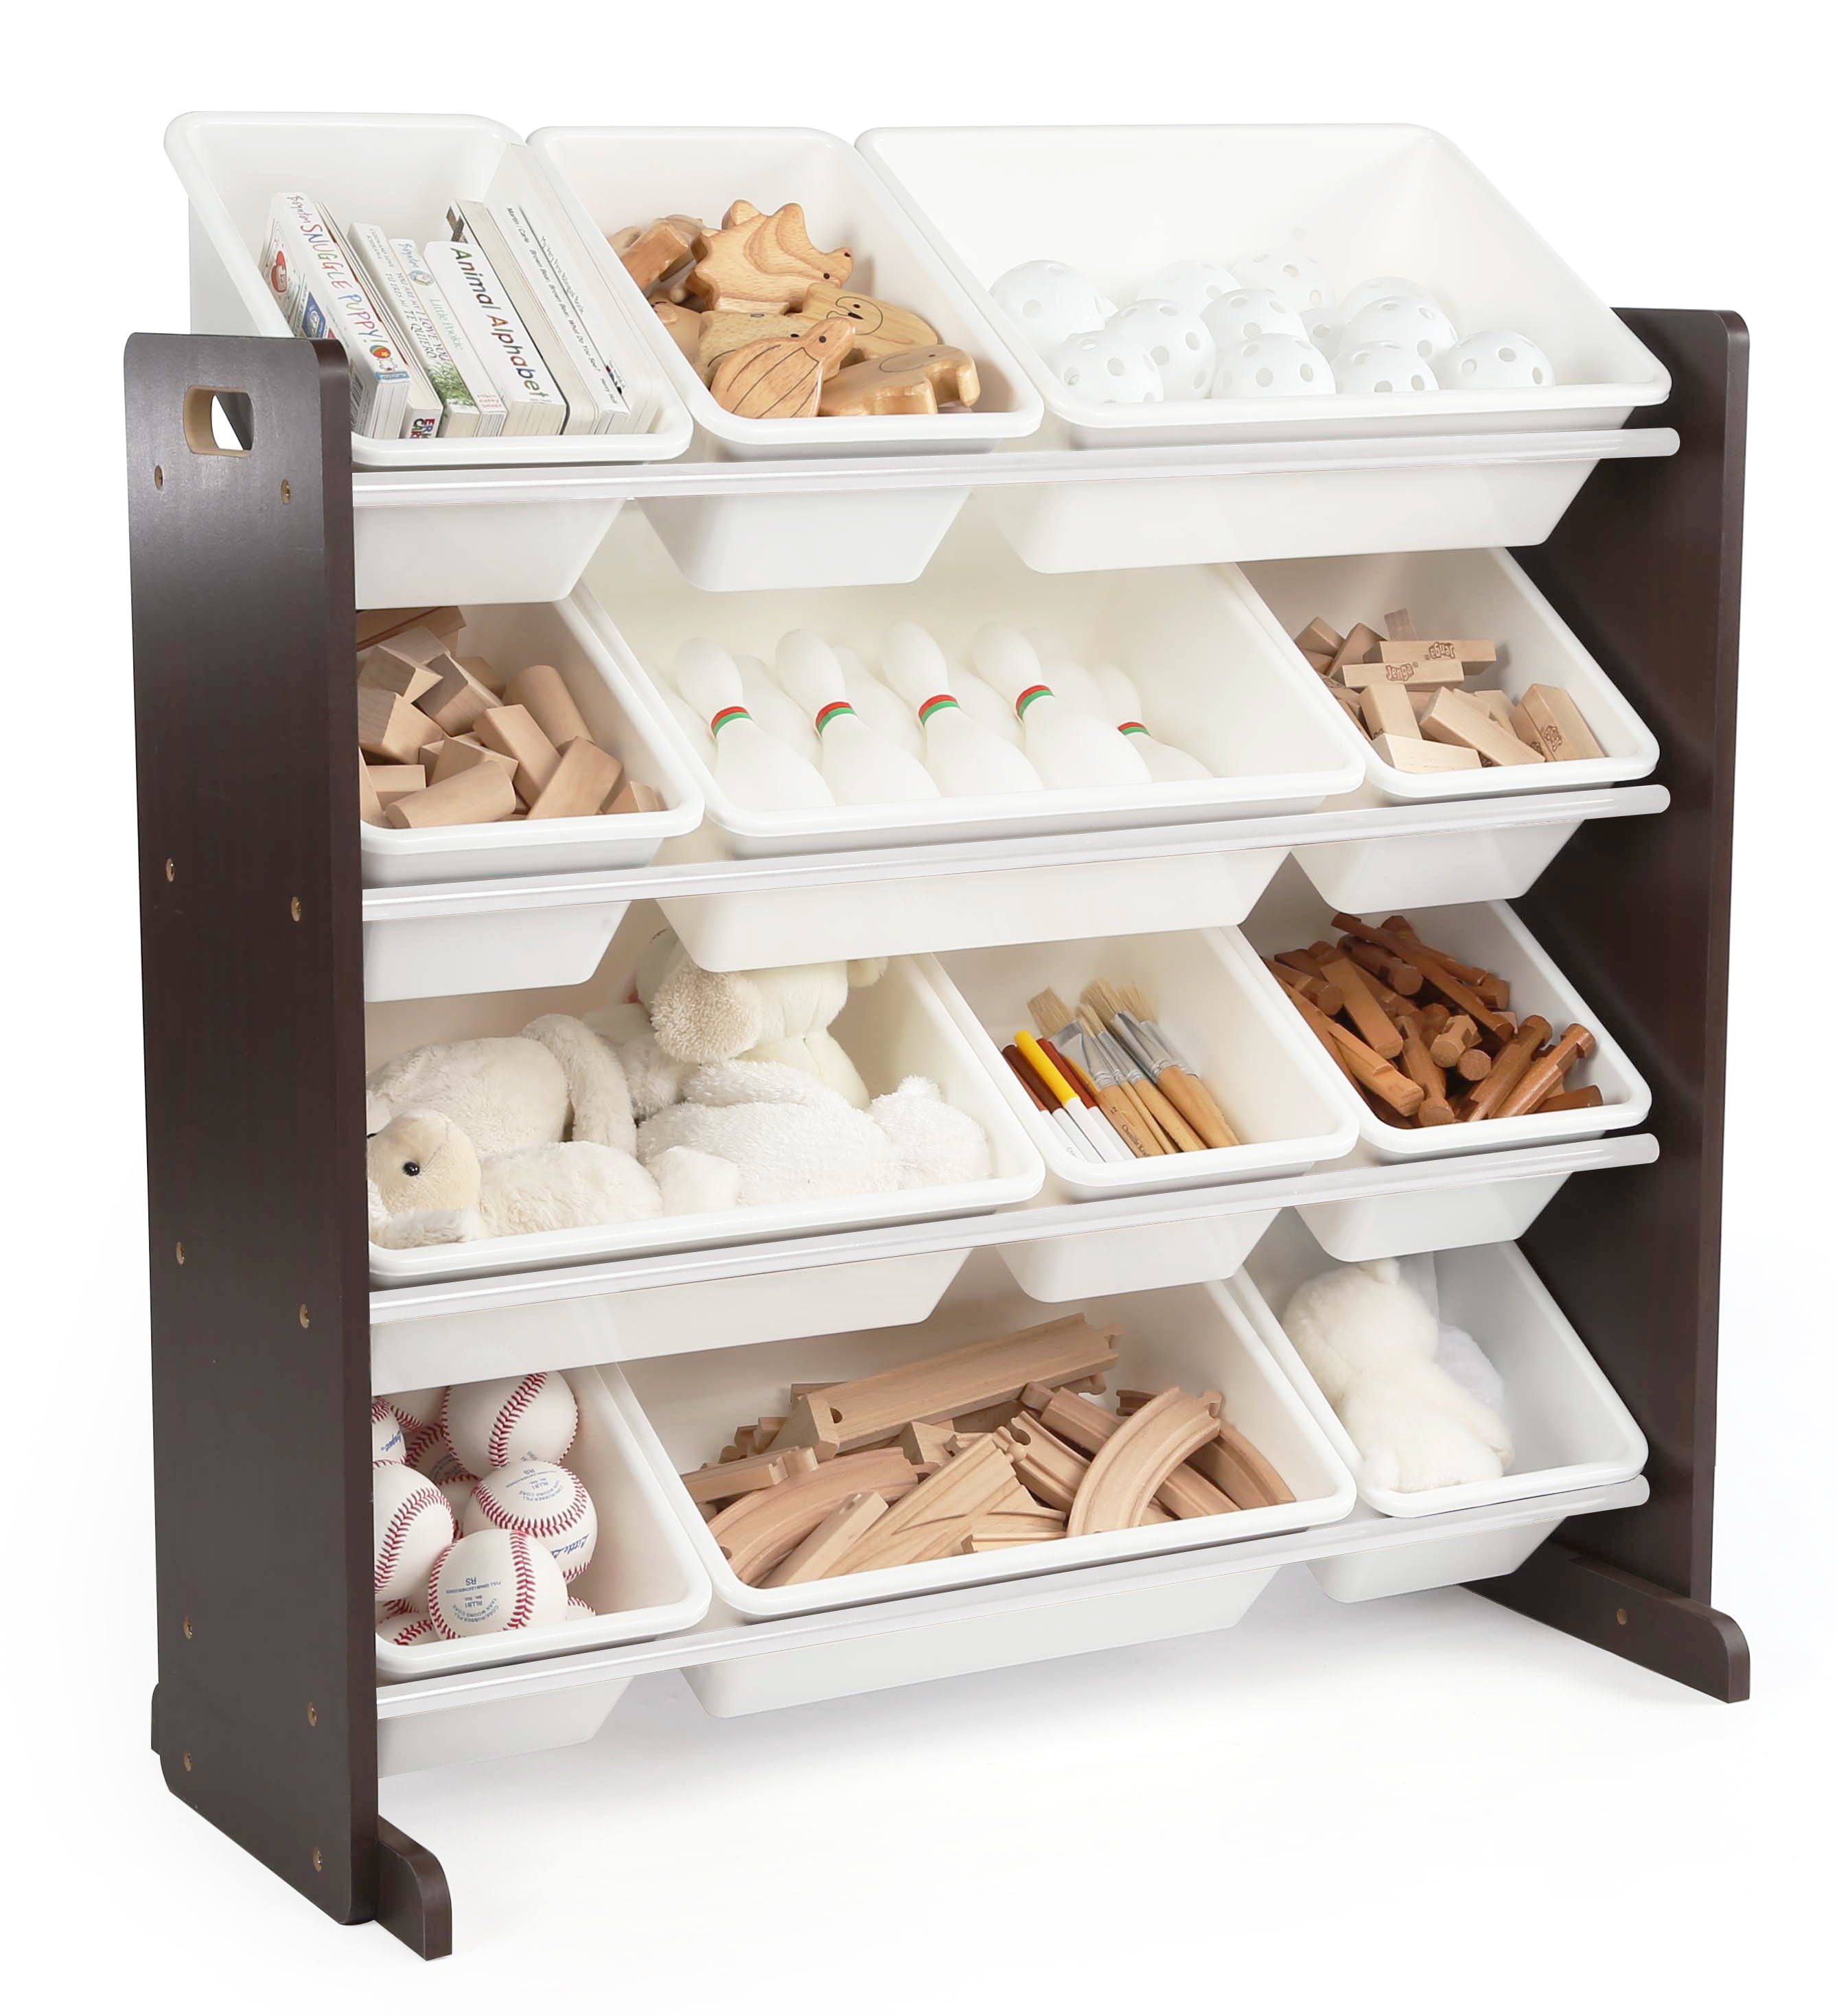 Strong Hold Bin Storage Cabinet with Shelves - Trammell Equipment Company